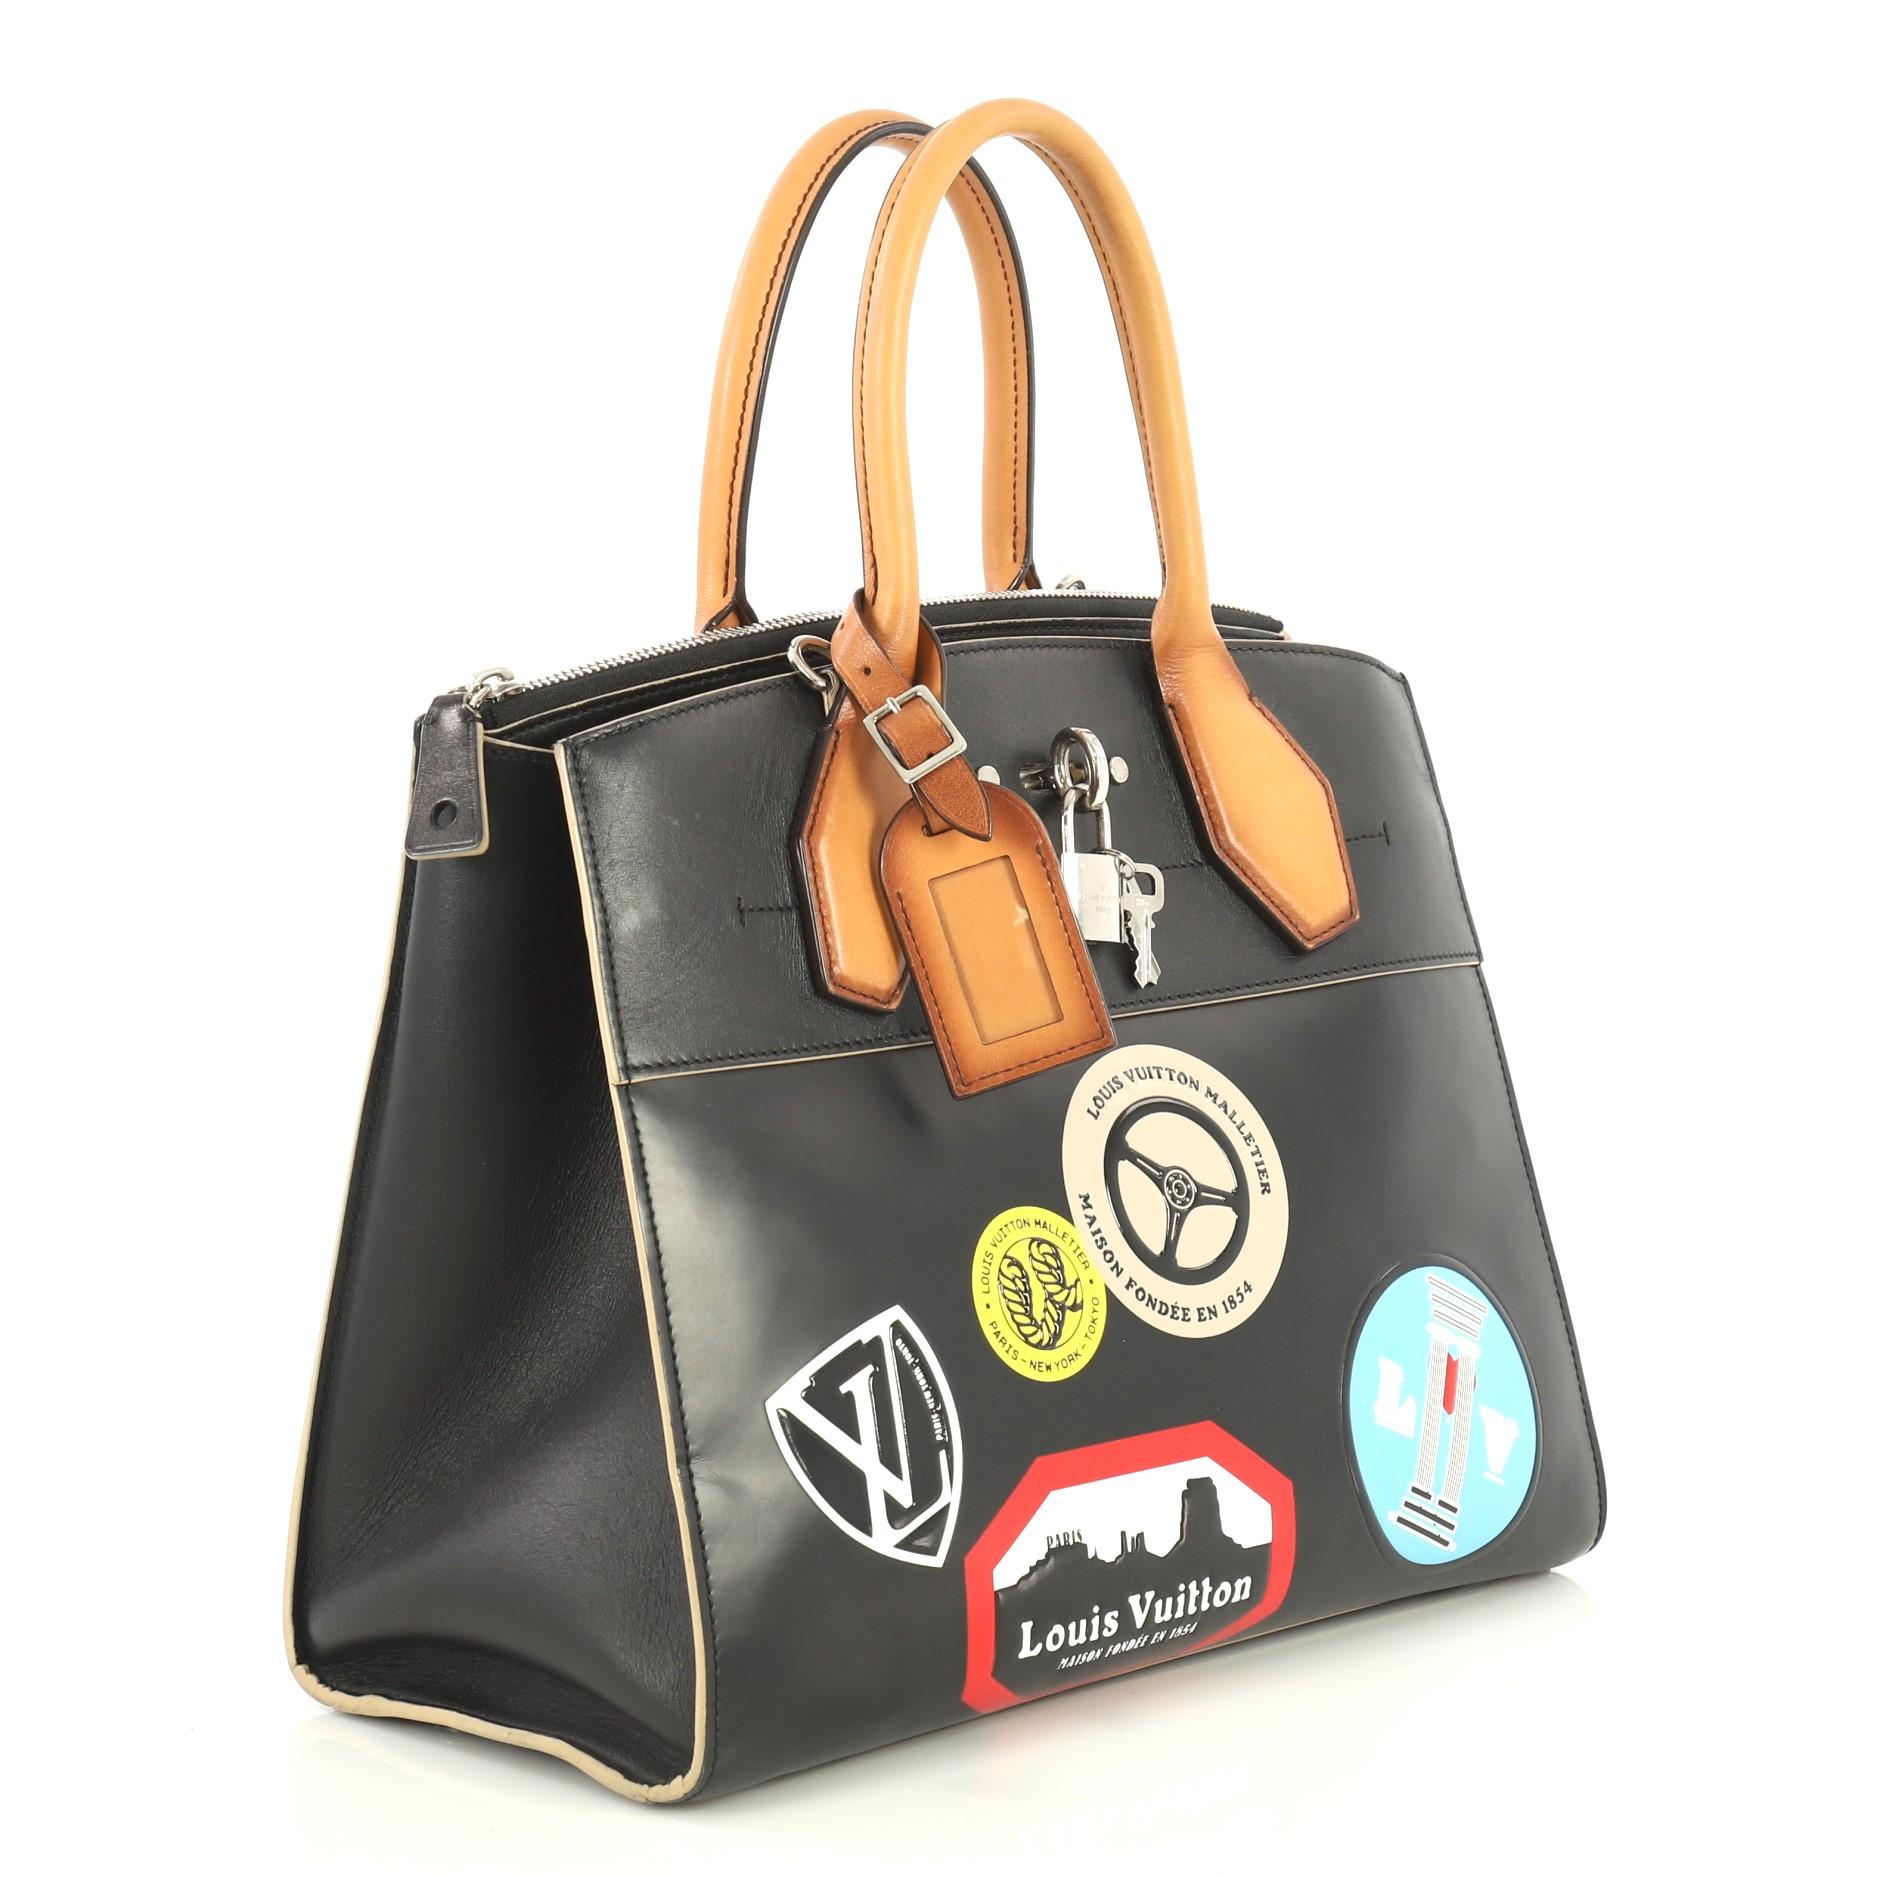 This Louis Vuitton City Steamer Handbag Limited Edition World Tour Leather MM, crafted from black leather, features dual rolled leather handles, front central lock with LV stamped logo, world tour stickers and silver-tone hardware. Its hook closure